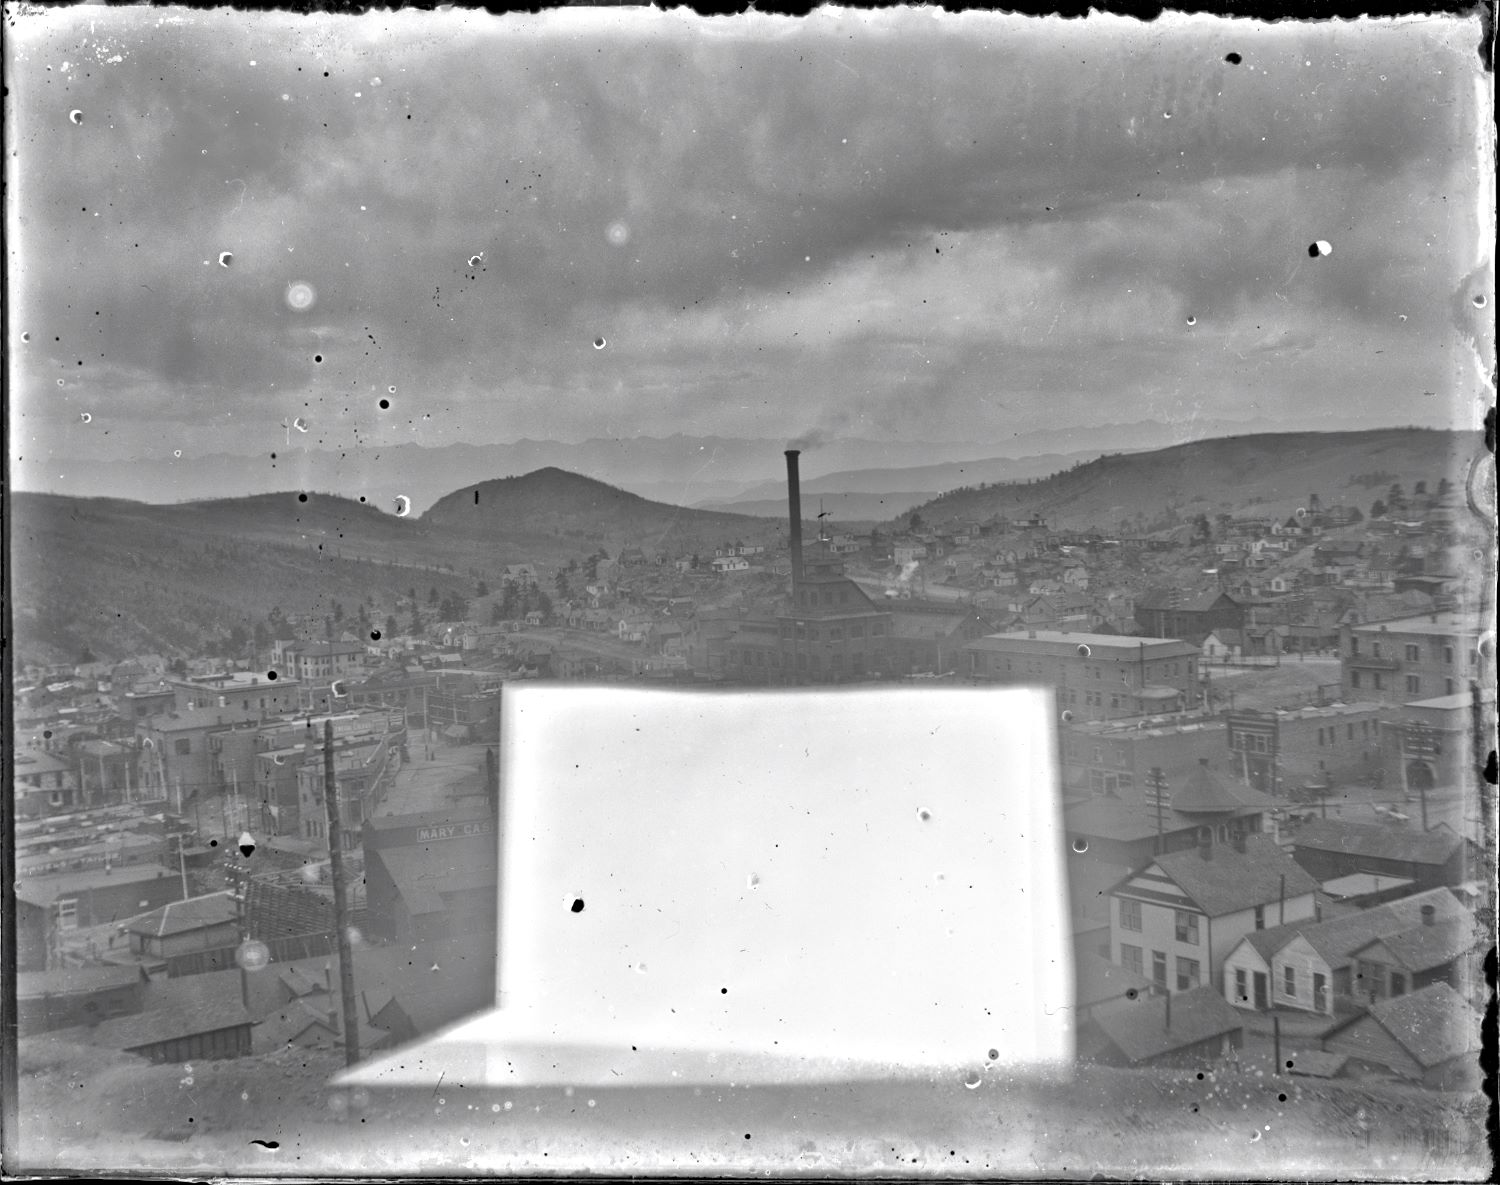 Sadly, this image is pretty messed up by that large whitish block showing up on the glass plate negative. Add the fact it is really not that sharp either, and blurs a little on the edges, and it folds itself nicely into most other images in my collection, close but not the best of views, like most of the images I have!
* Around center of the view is the familiar look of the Gold Coin structures, looking at the north and east walls.
* Near lower left is the F. & C.C. depot, the western part of it obscured by the crib-wall of the Mary Cashen mine. The Ore-house is partly hidden under the damaged part, same with the head frame, and any other possible good things.
* The M.T. depot is seen near the lower right corner.
* Near the right-hand side, about 2/5 down from the top, is the head frame and hoist house of the Golconda mine, sadly I was not able to get a sharp scan so there is no reason to try get a closer look as it really is not much to look at, not sharp at all in a higher resolution scan.